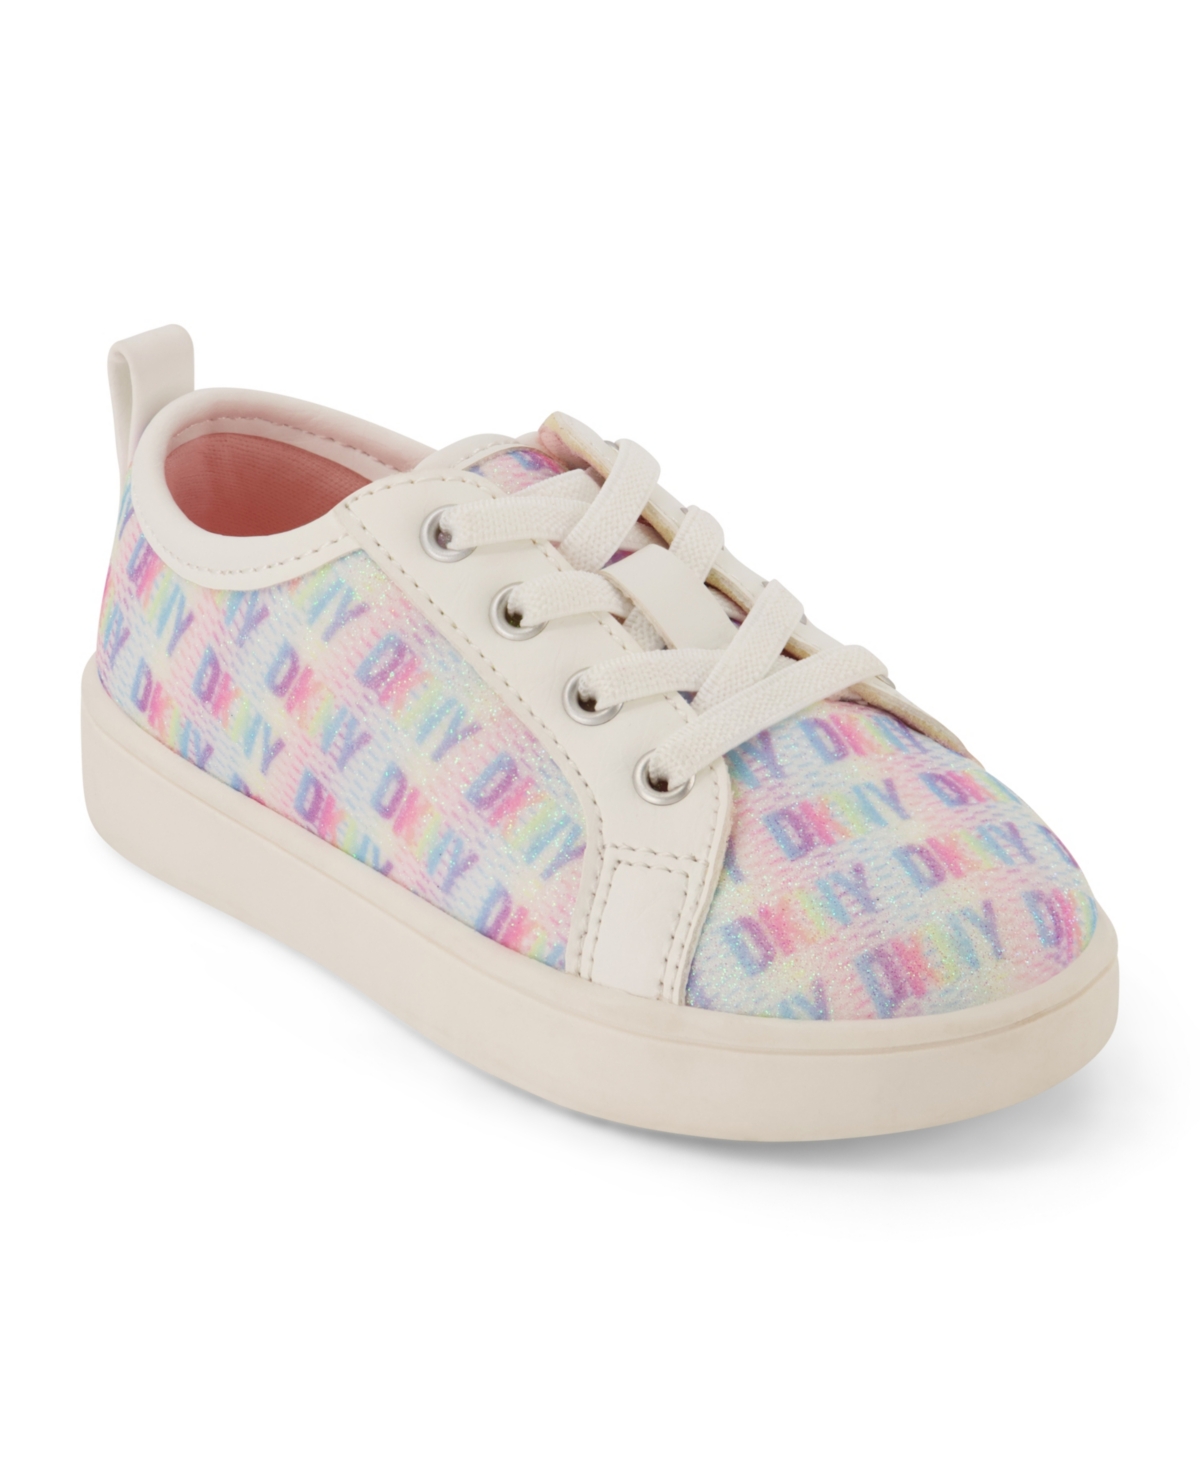 Dkny Toddler Girls Lace Up Sneakers In Multi Colored